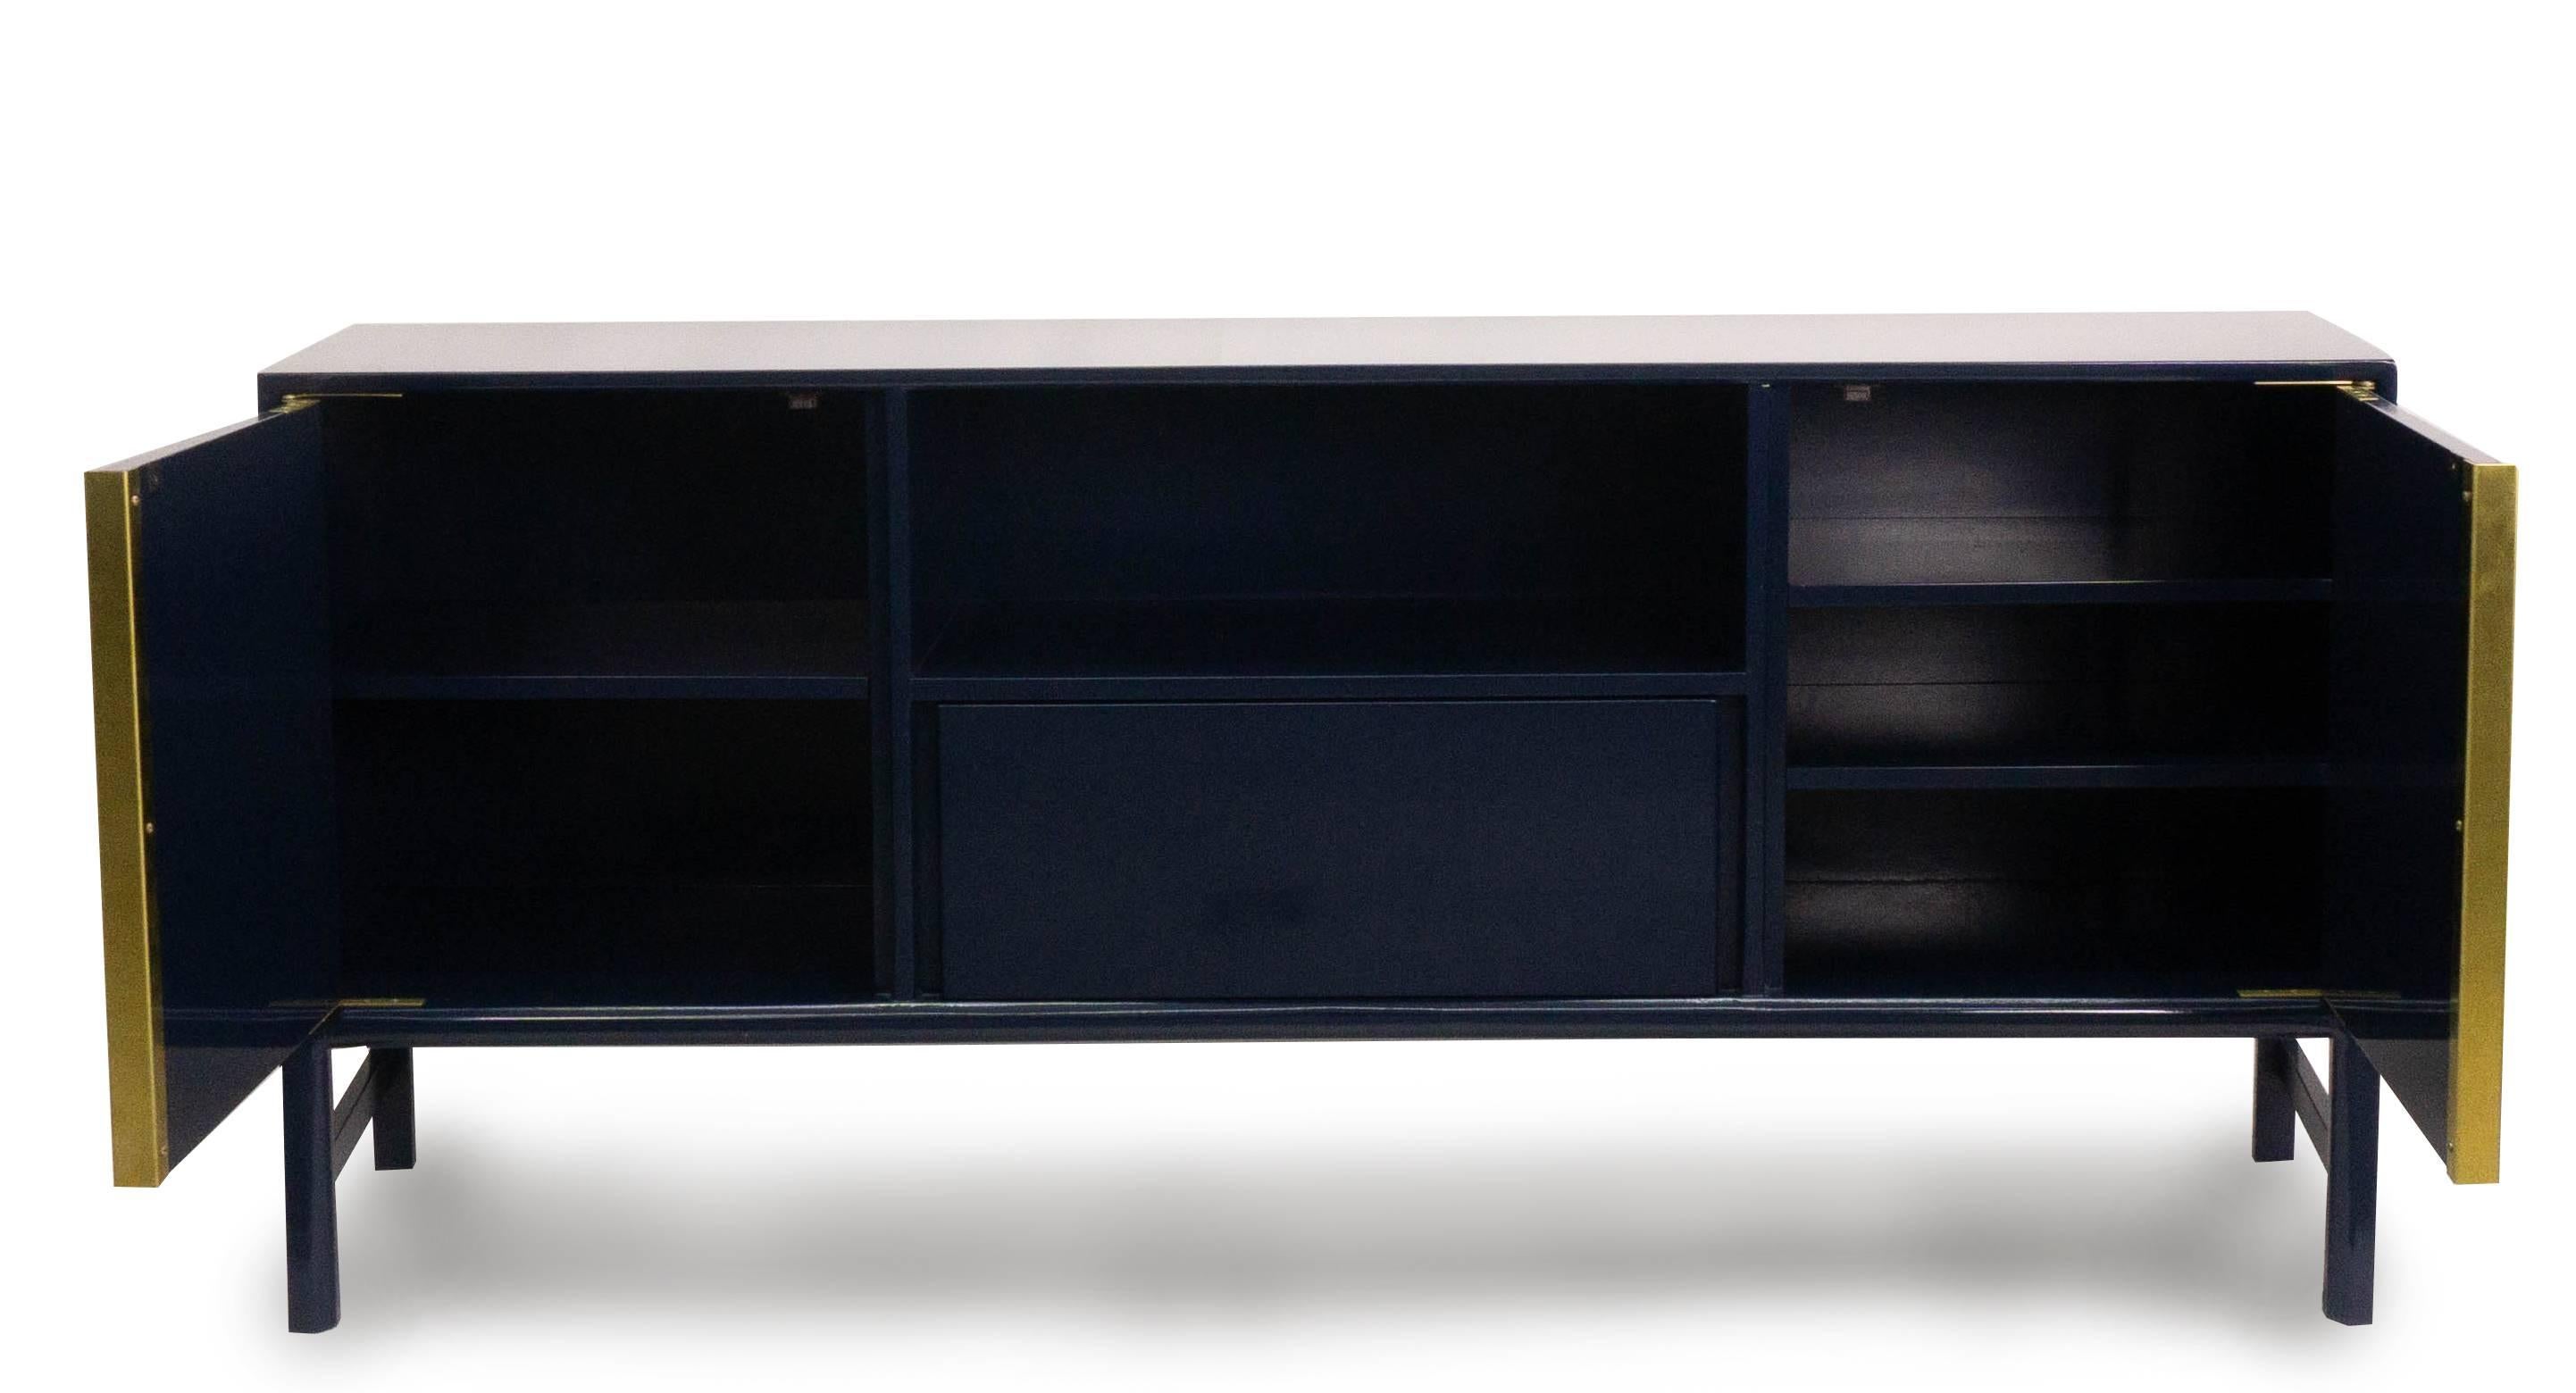 Our boomerang sideboard is lacquered in high gloss Benjamin Moore Dark Royal Blue. This modern console features cabinets, a centre drawer and a shelf. The cabinet doors are finished with a decorative treatment that provide depth and texture and are